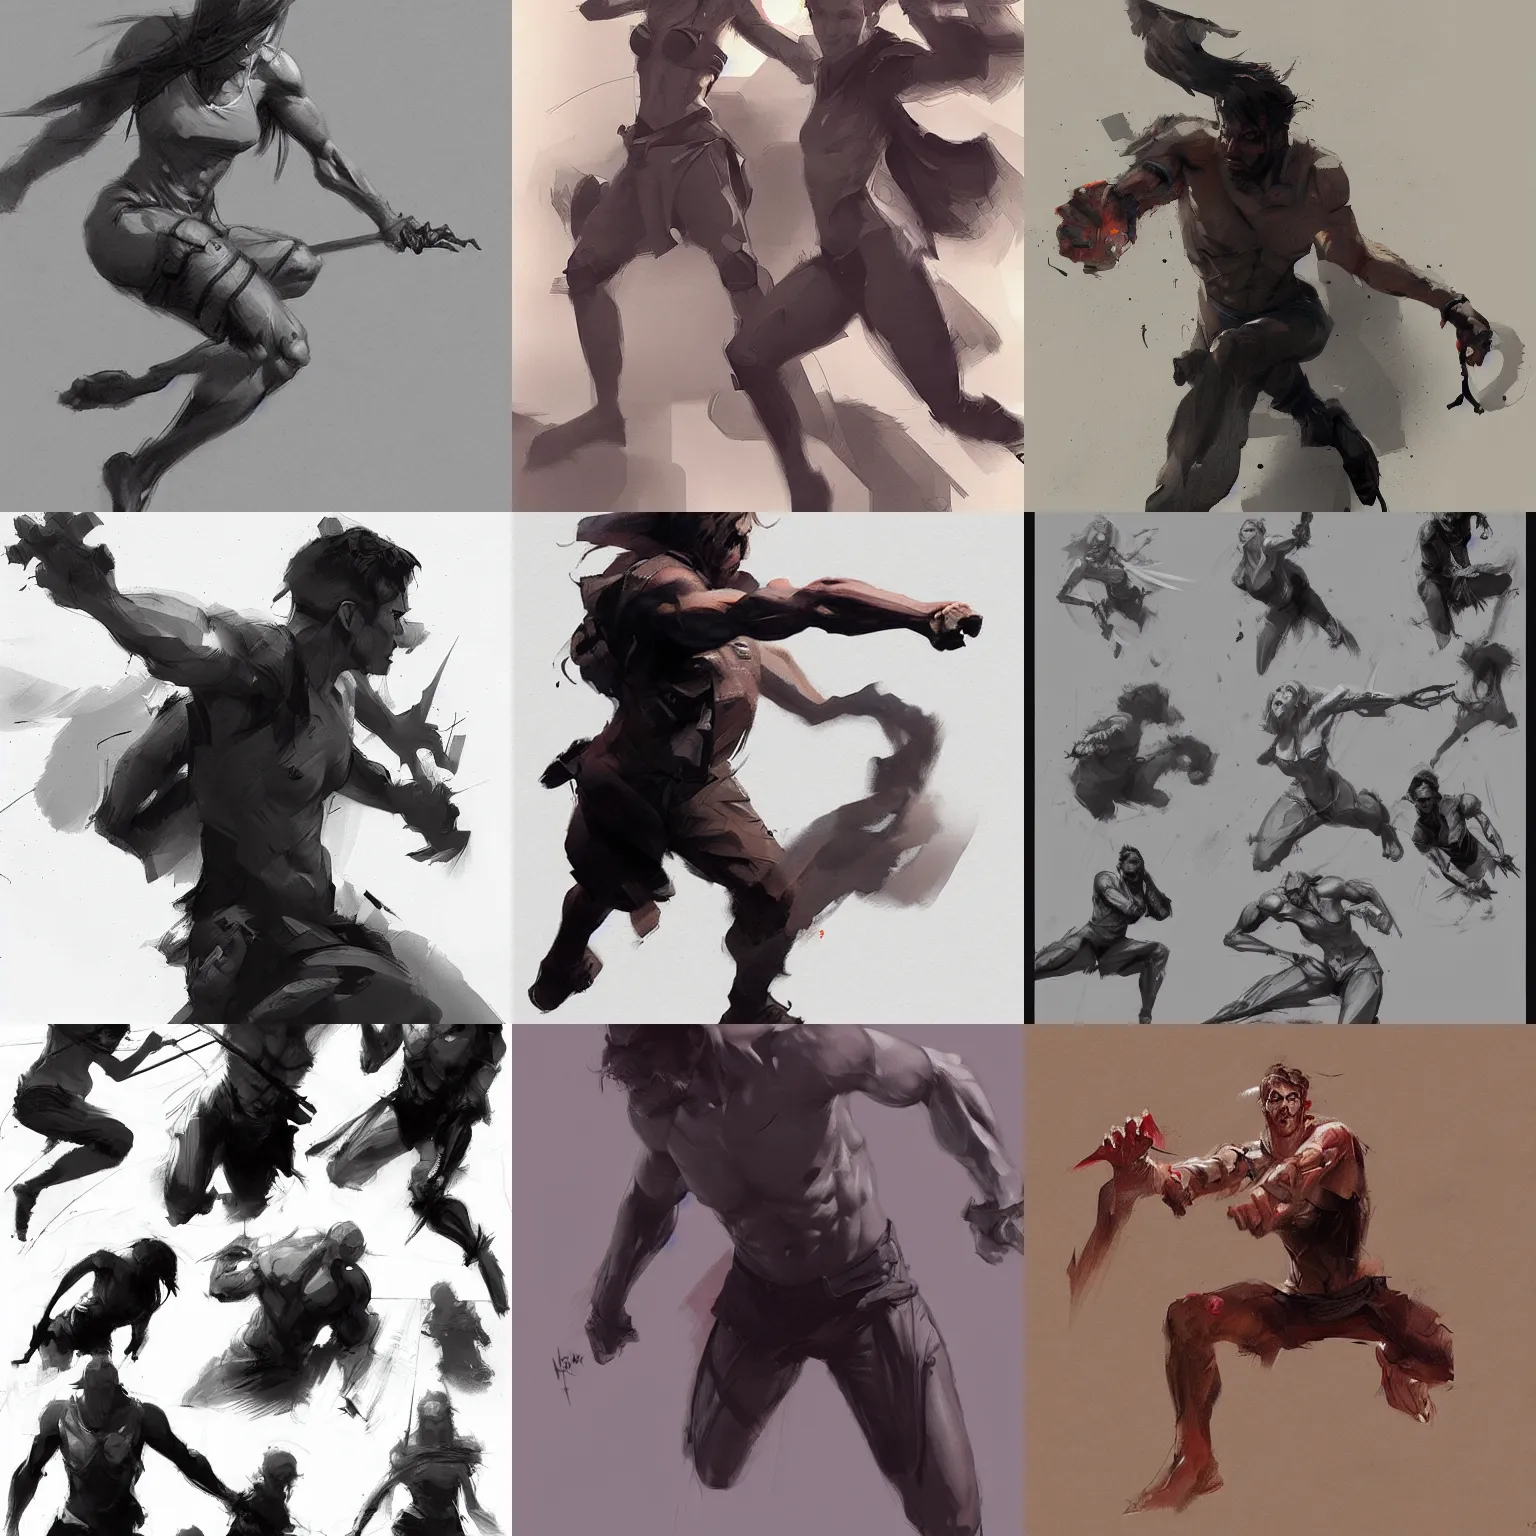 Study from our Dynamic Action reference pack